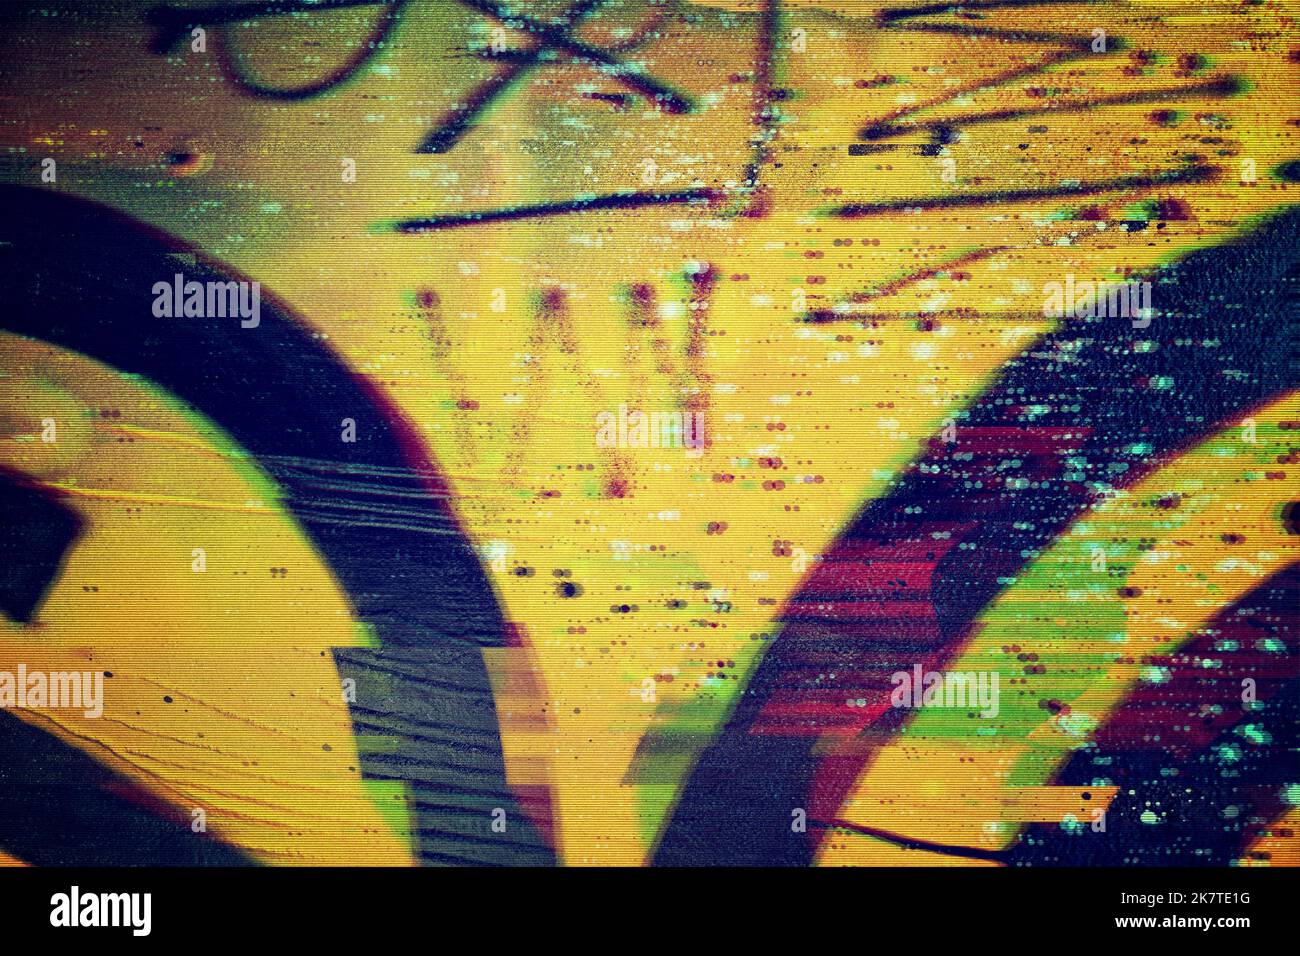 Abstract futuristic urban yellow, black, green motion glitch effect background  Stock Photo